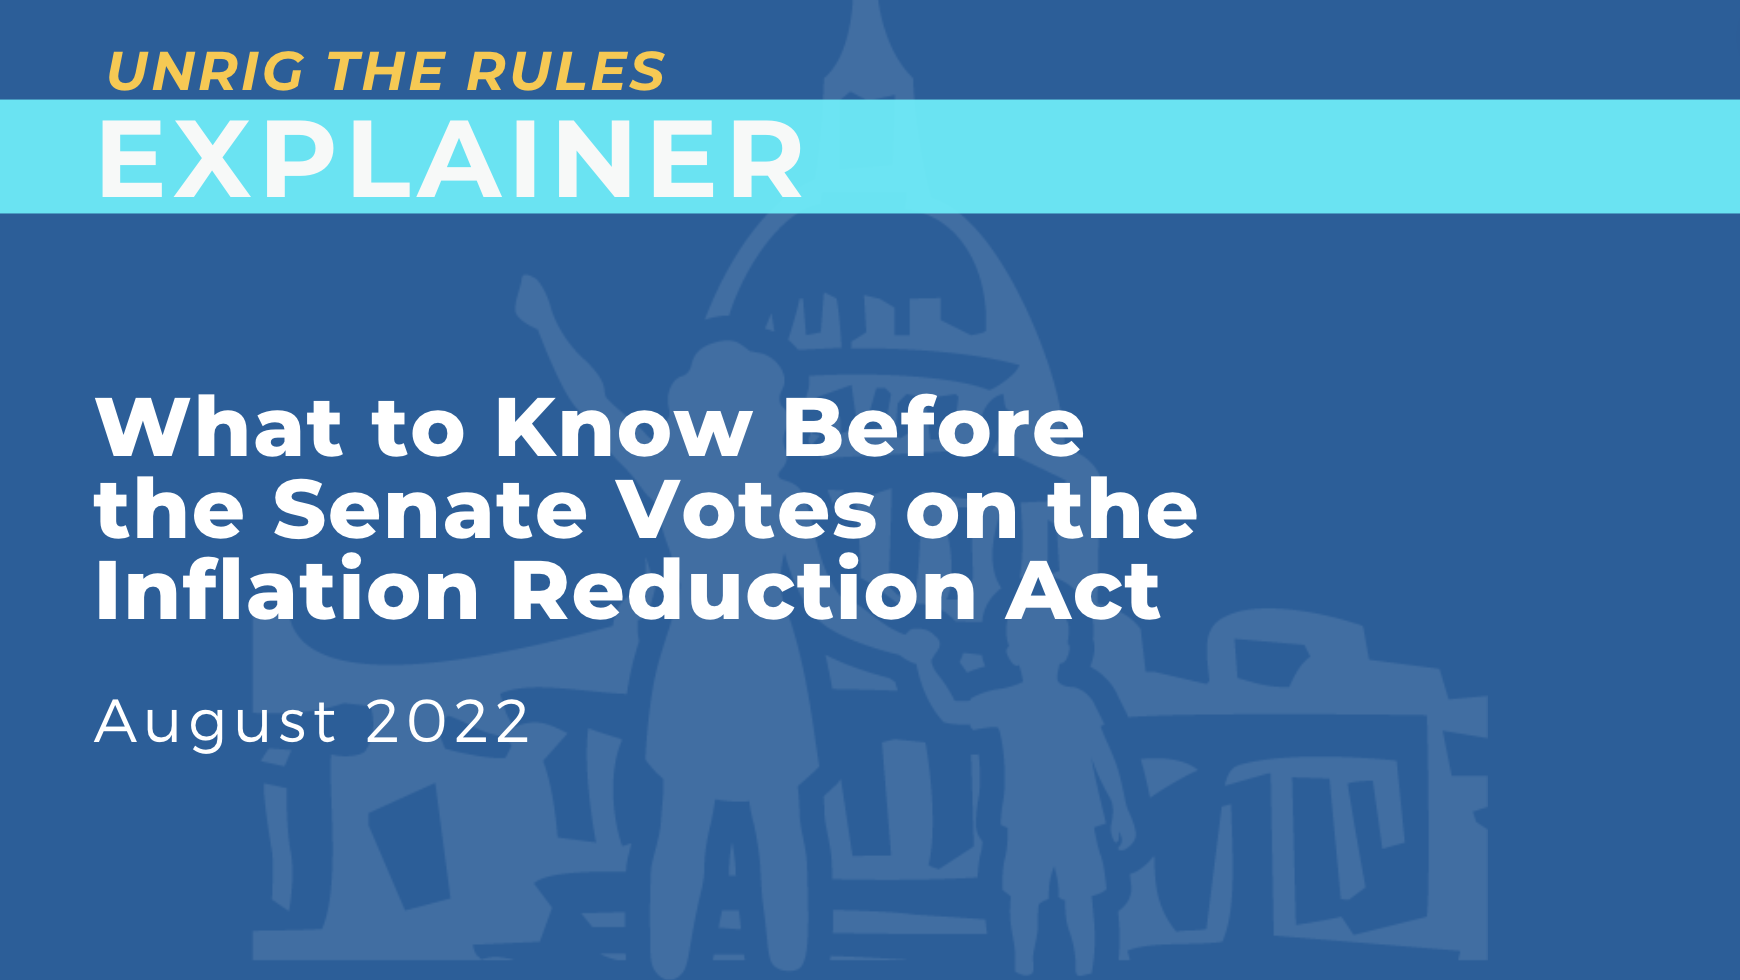 What to Know Before the Senate Votes on the Inflation Reduction Act